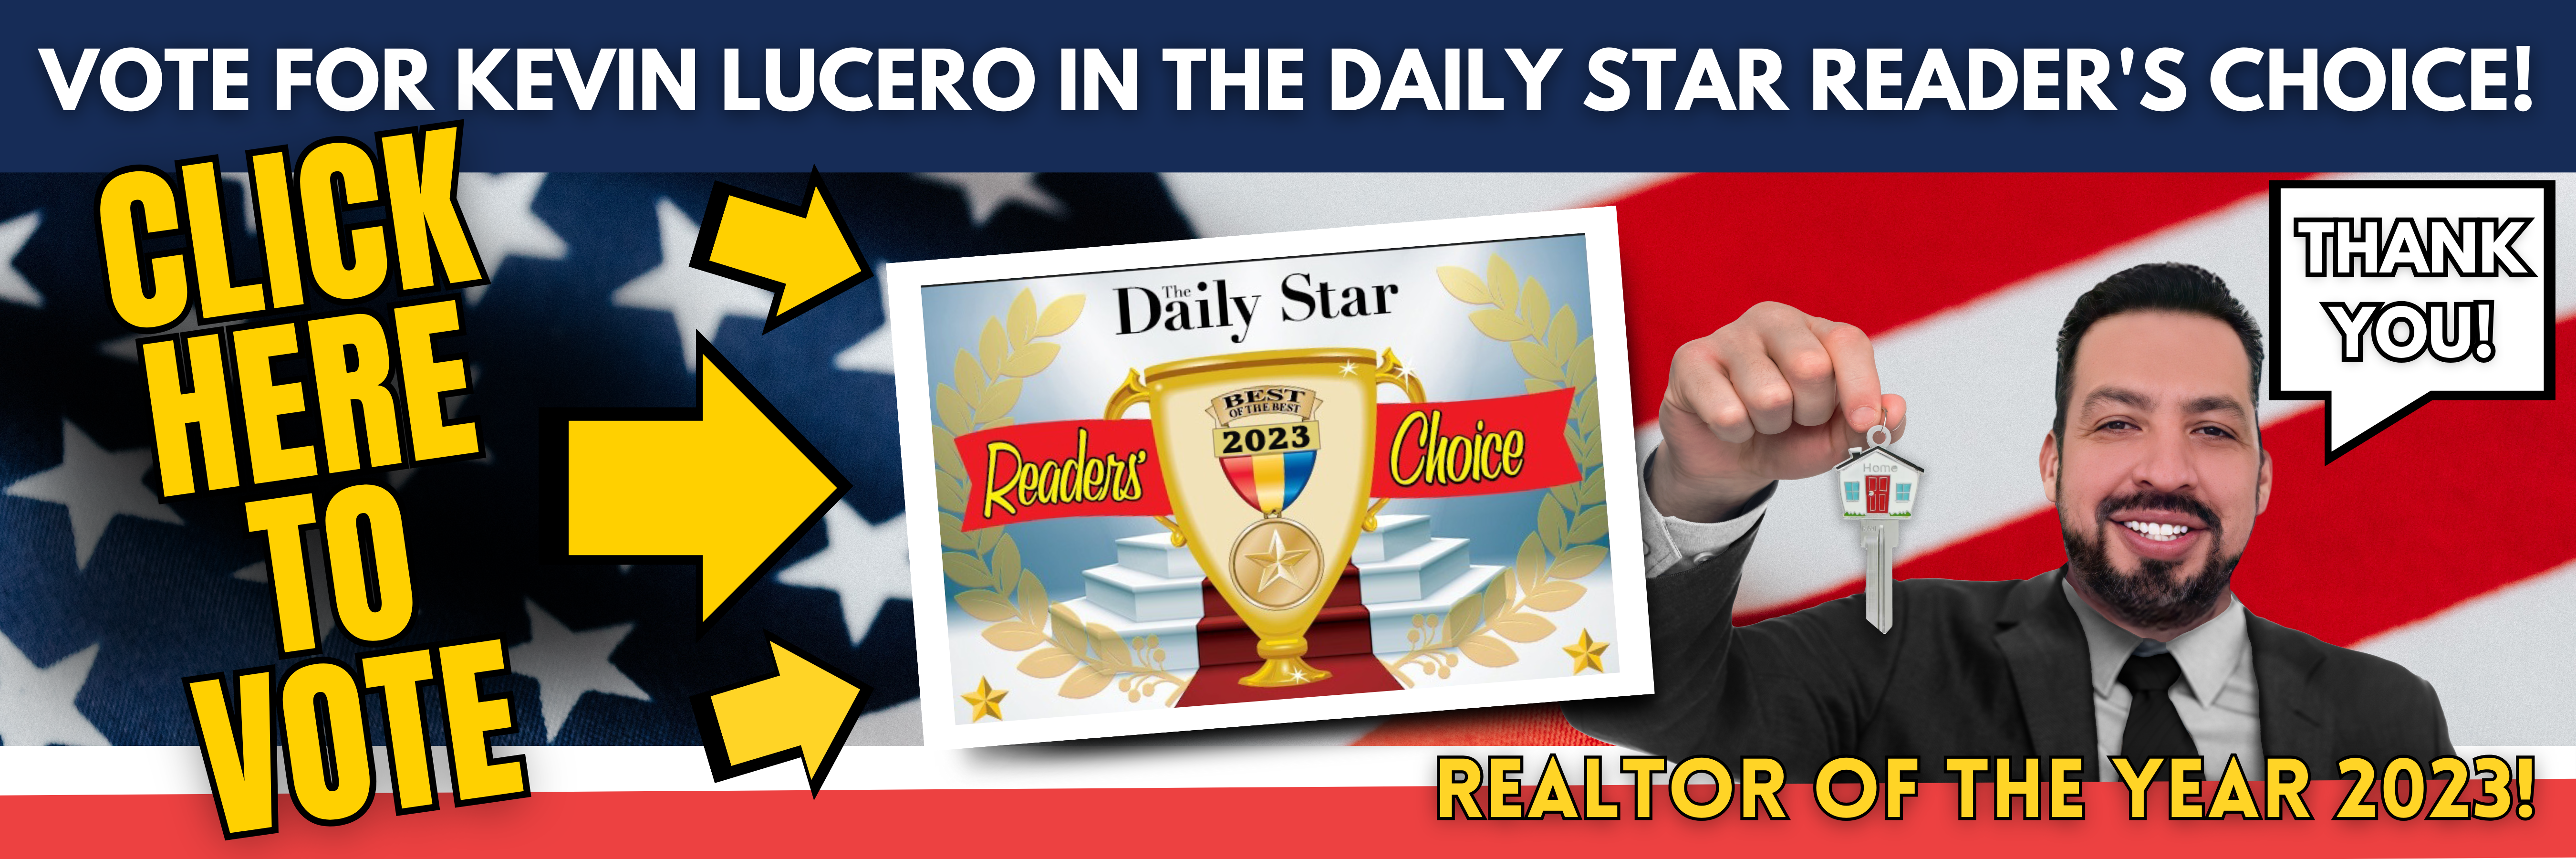 Vote for Kevin Lucero in The Daily Star Newspaper's Readers' Choice Award for Realtor of the Year, serving Cooperstown, Oneonta, Chenango County, Delaware County, and Otsego County.